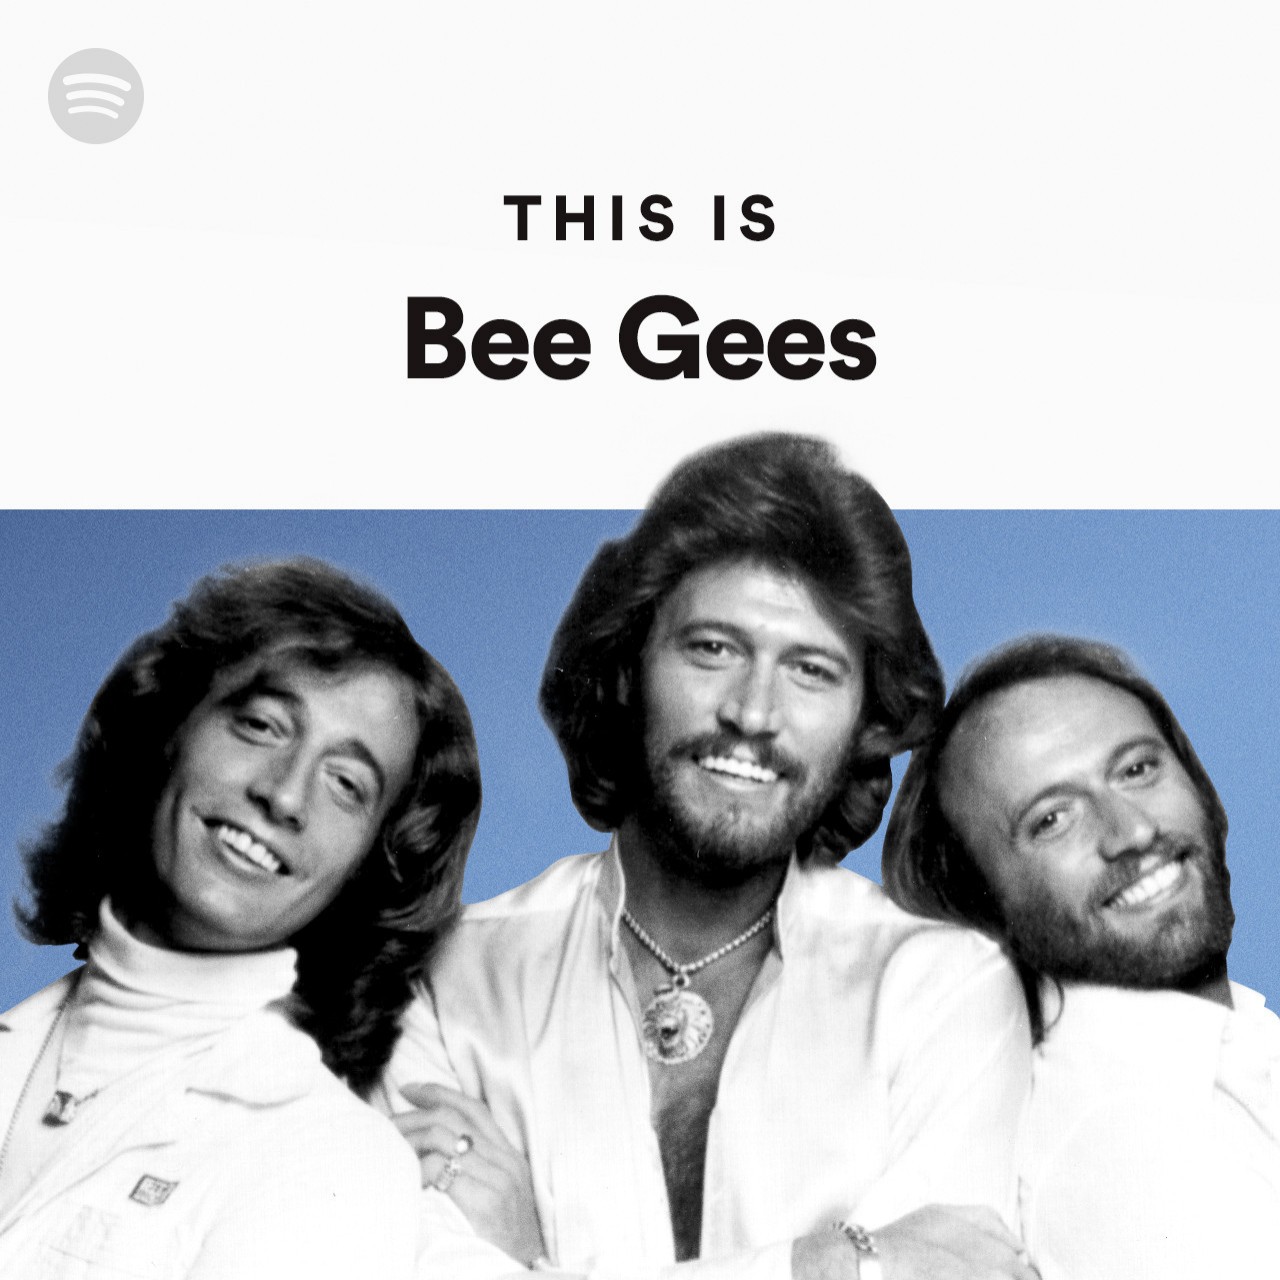 Be gees how deep. Bee Gees 2020. Bee Gees Bee Gees 2020. Bee Gees и Beatles. Bee Gees more than a woman картинки.